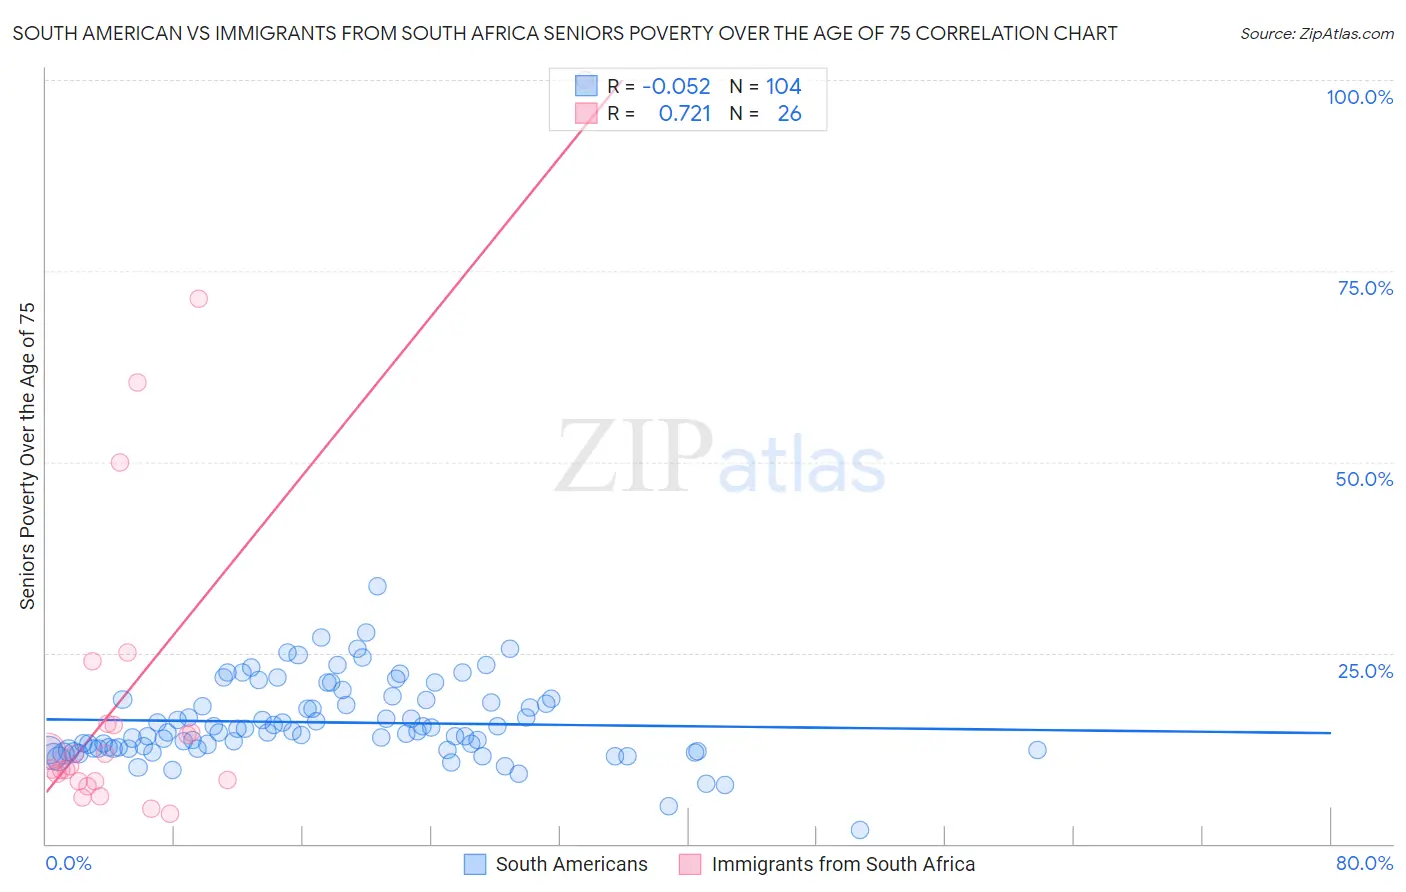 South American vs Immigrants from South Africa Seniors Poverty Over the Age of 75